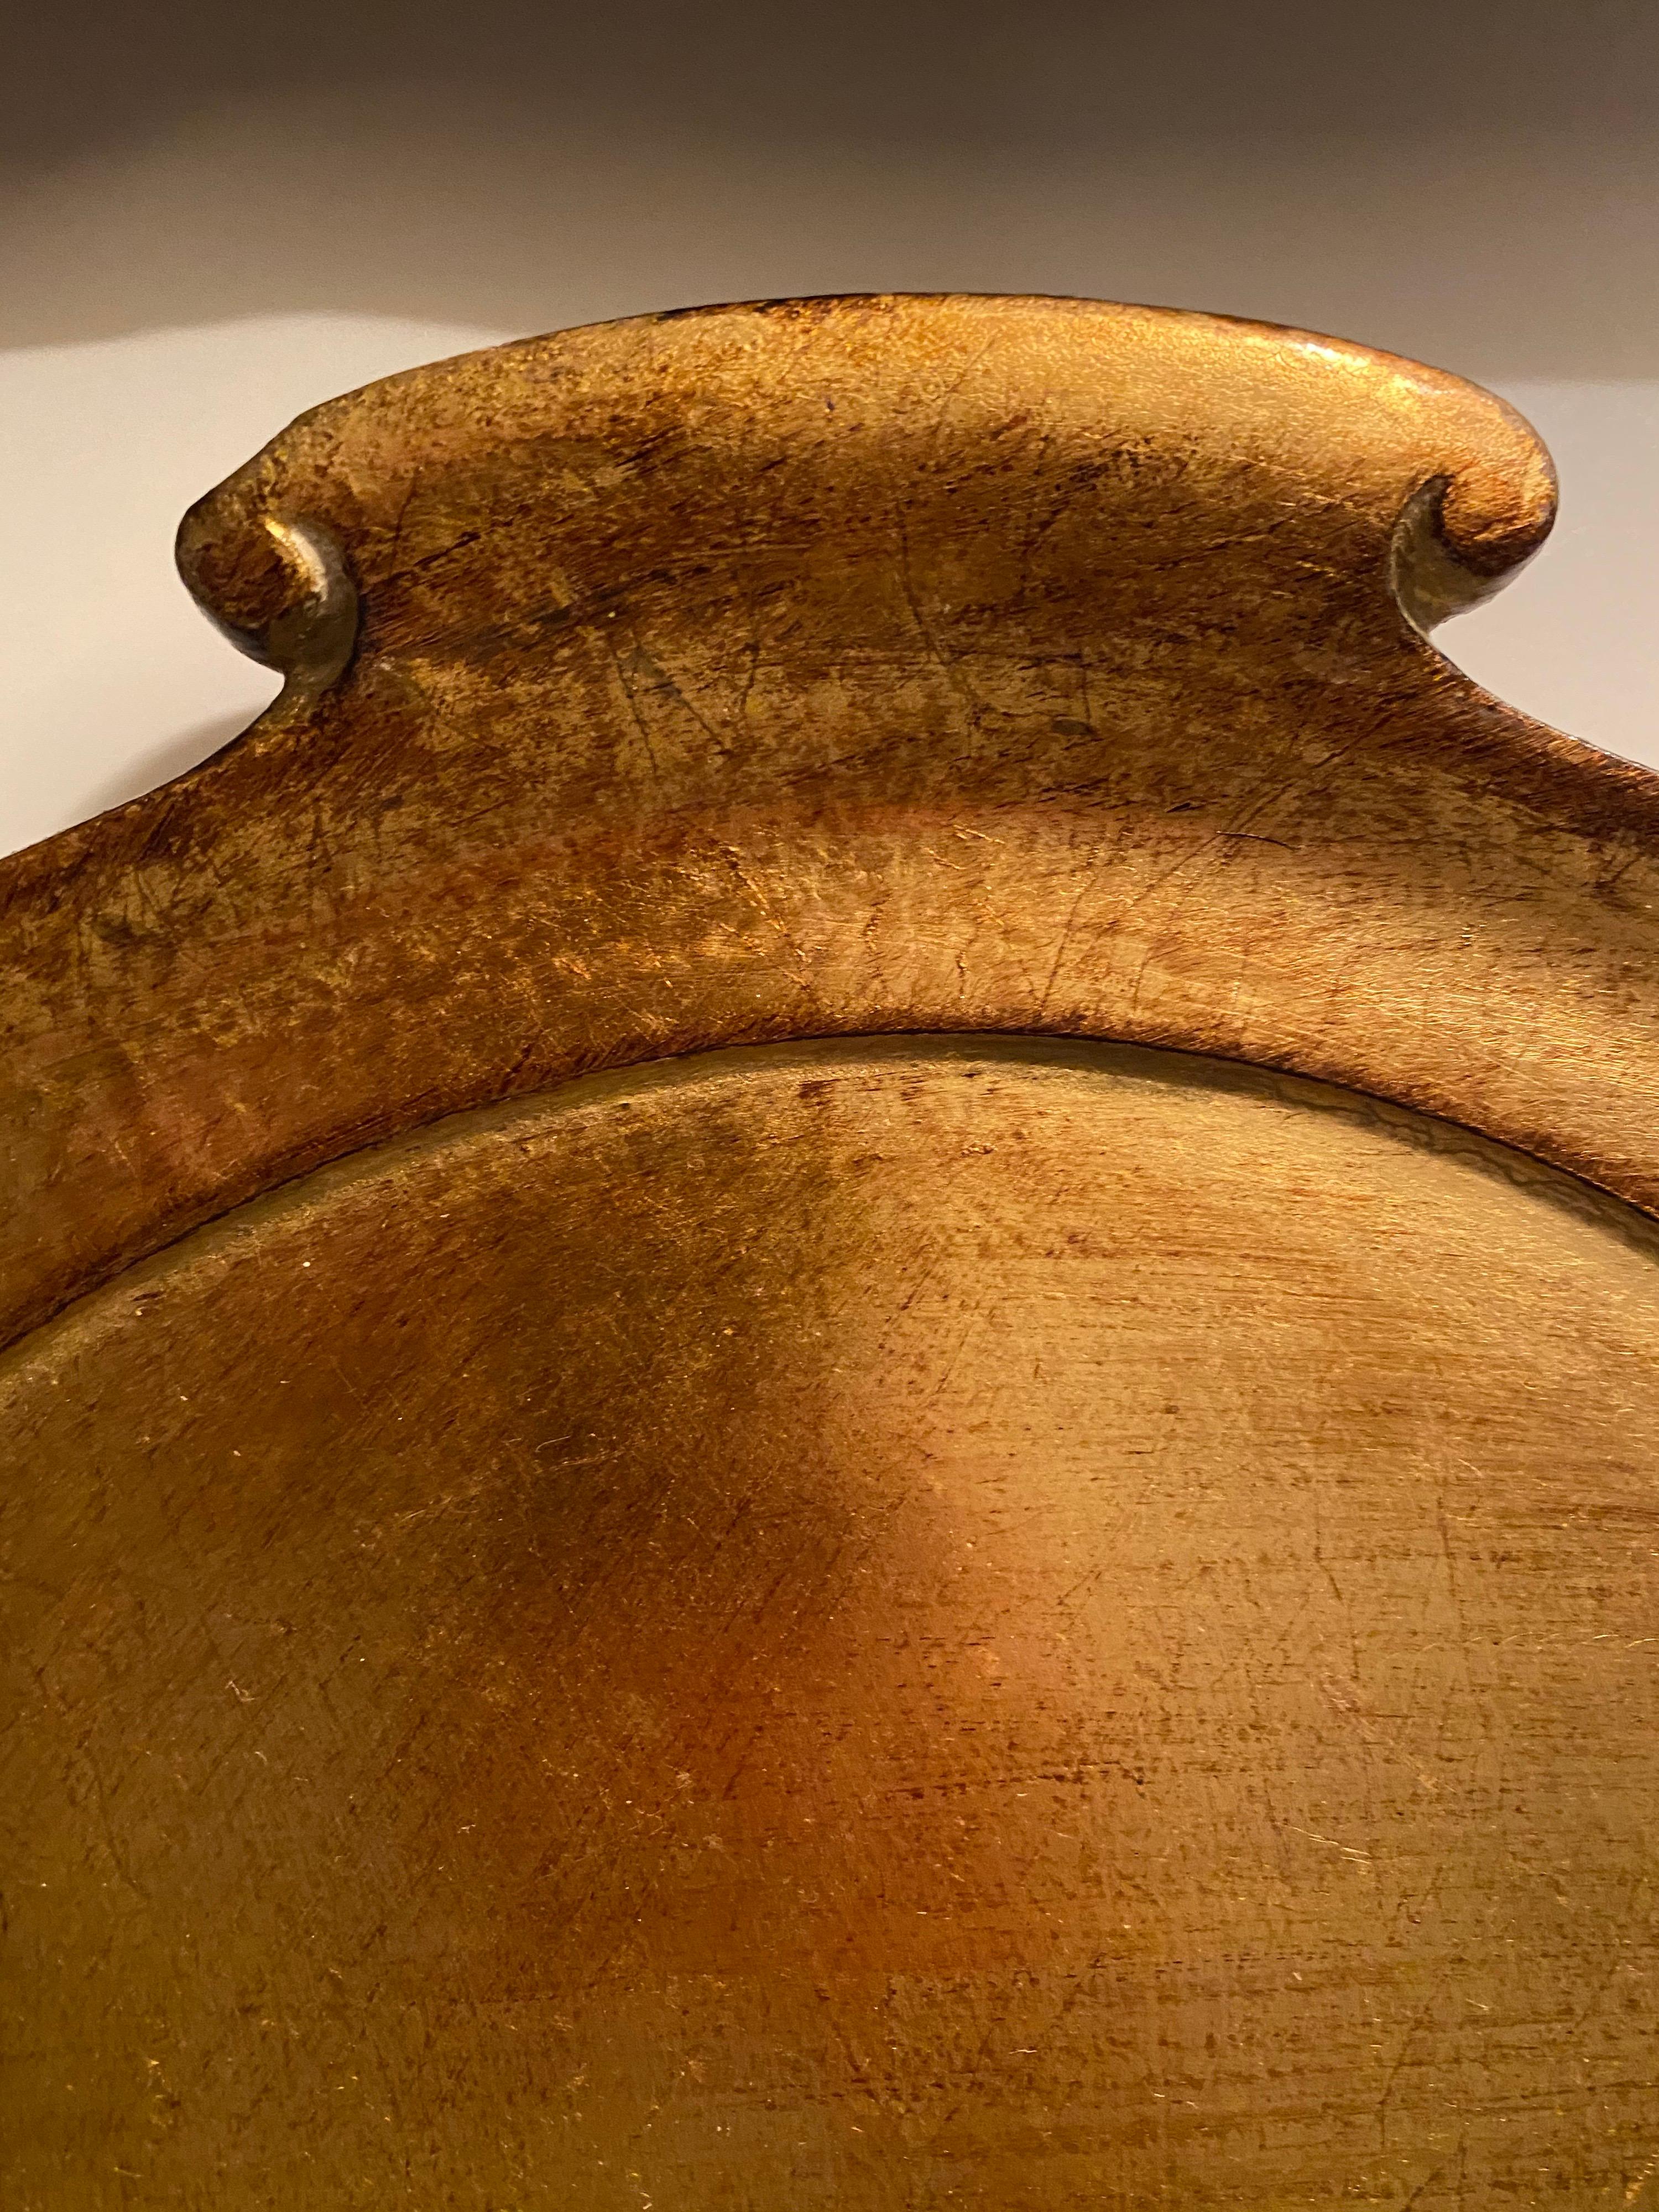 A gold leaf wood serving tray with handles by Vietri. Made in Italy, circa 2010.

Maestro artisans handcarve each beautiful curve of the Florentine Wooden Accessories Handled Medium Oval Tray before applying a signature gold leaf. This timeless